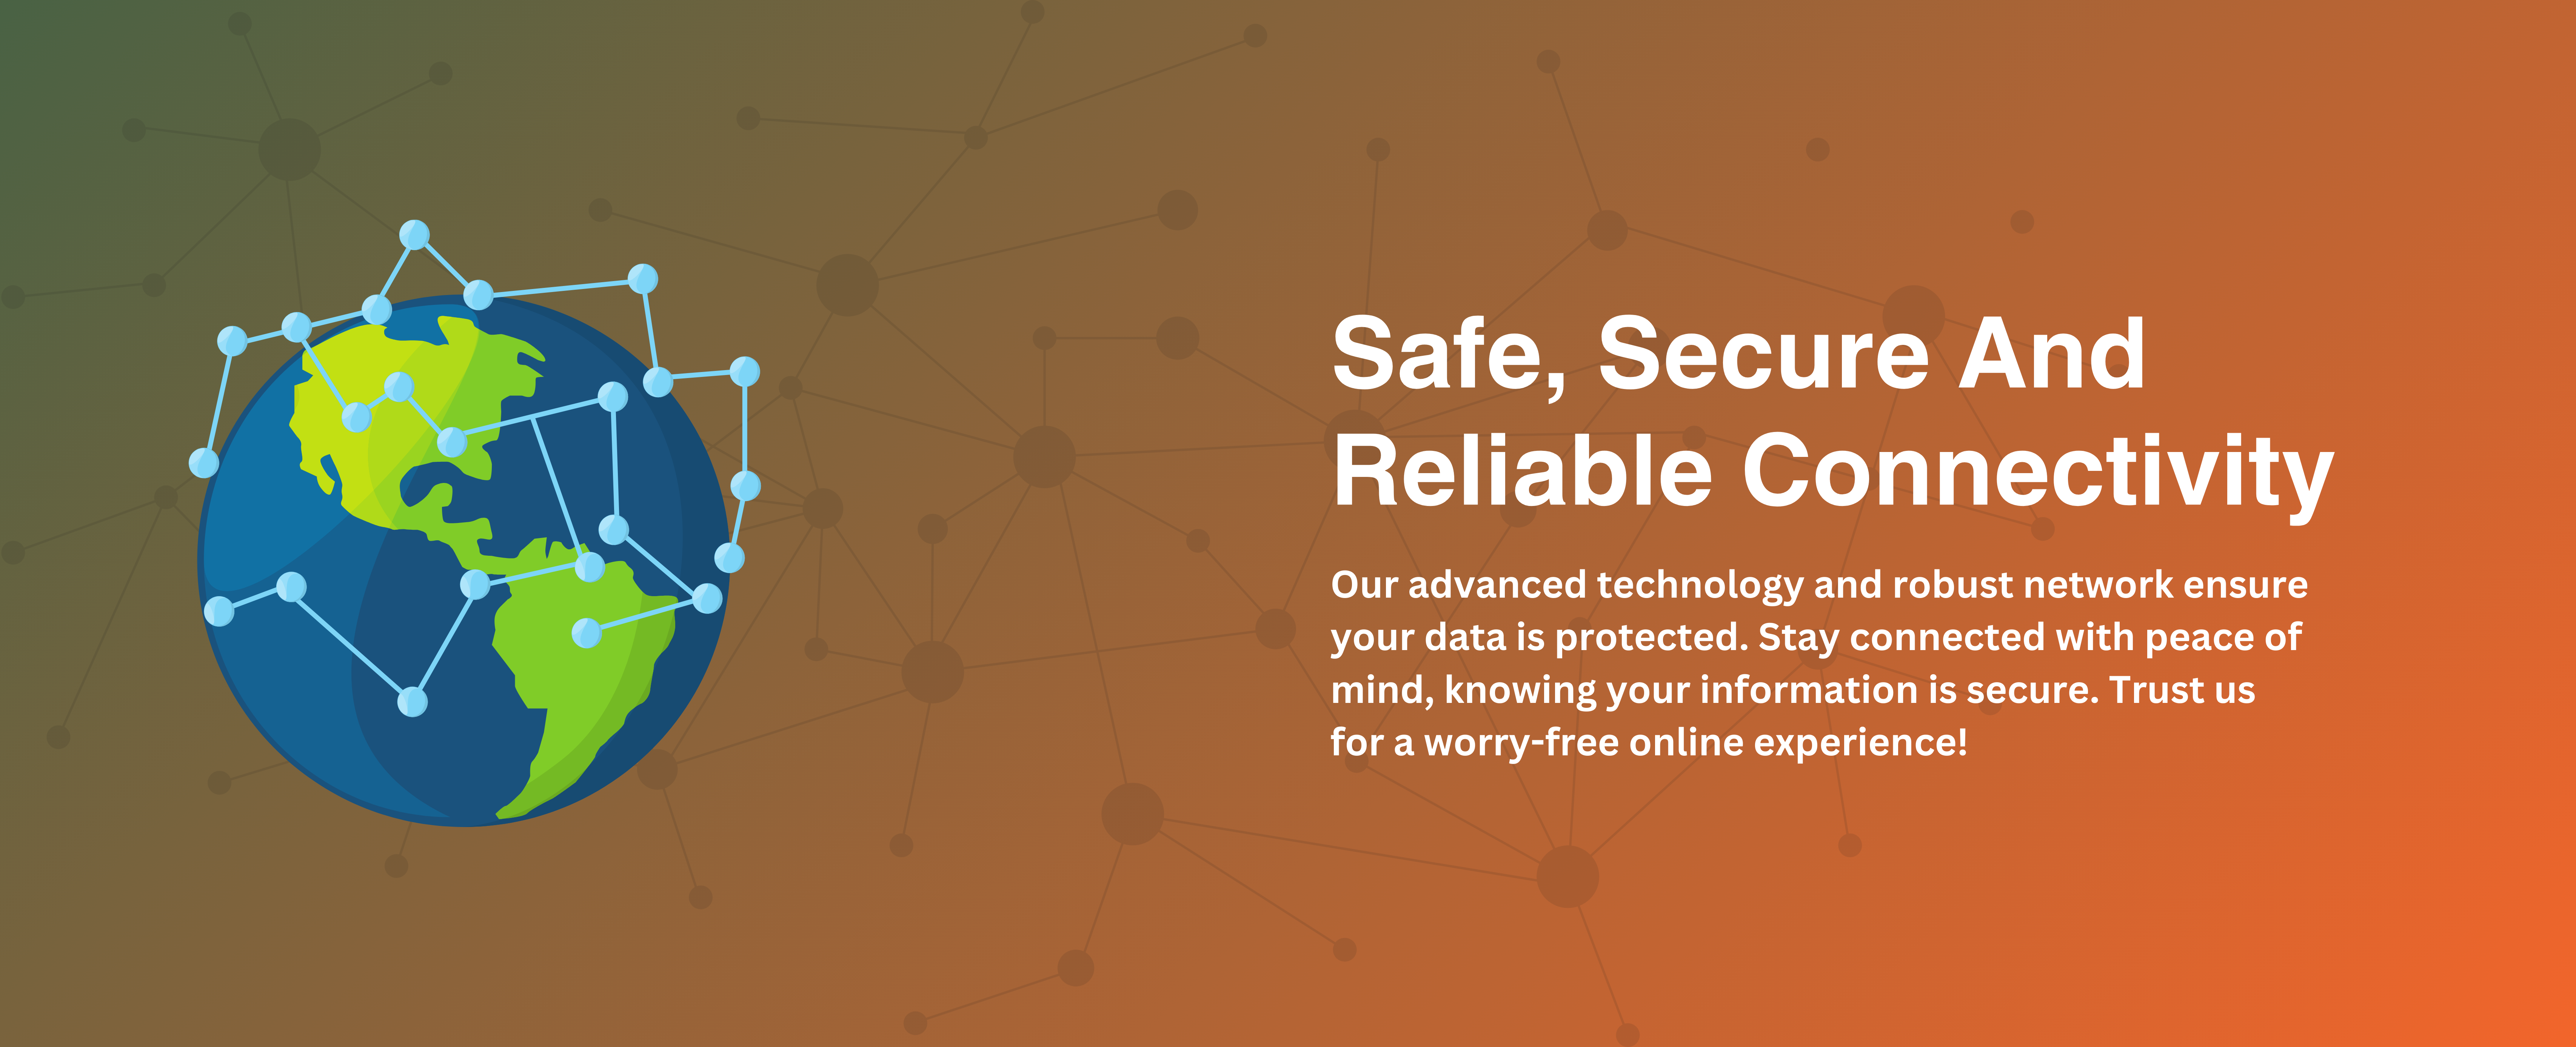 Safe, Secure And Reliable Connectivity